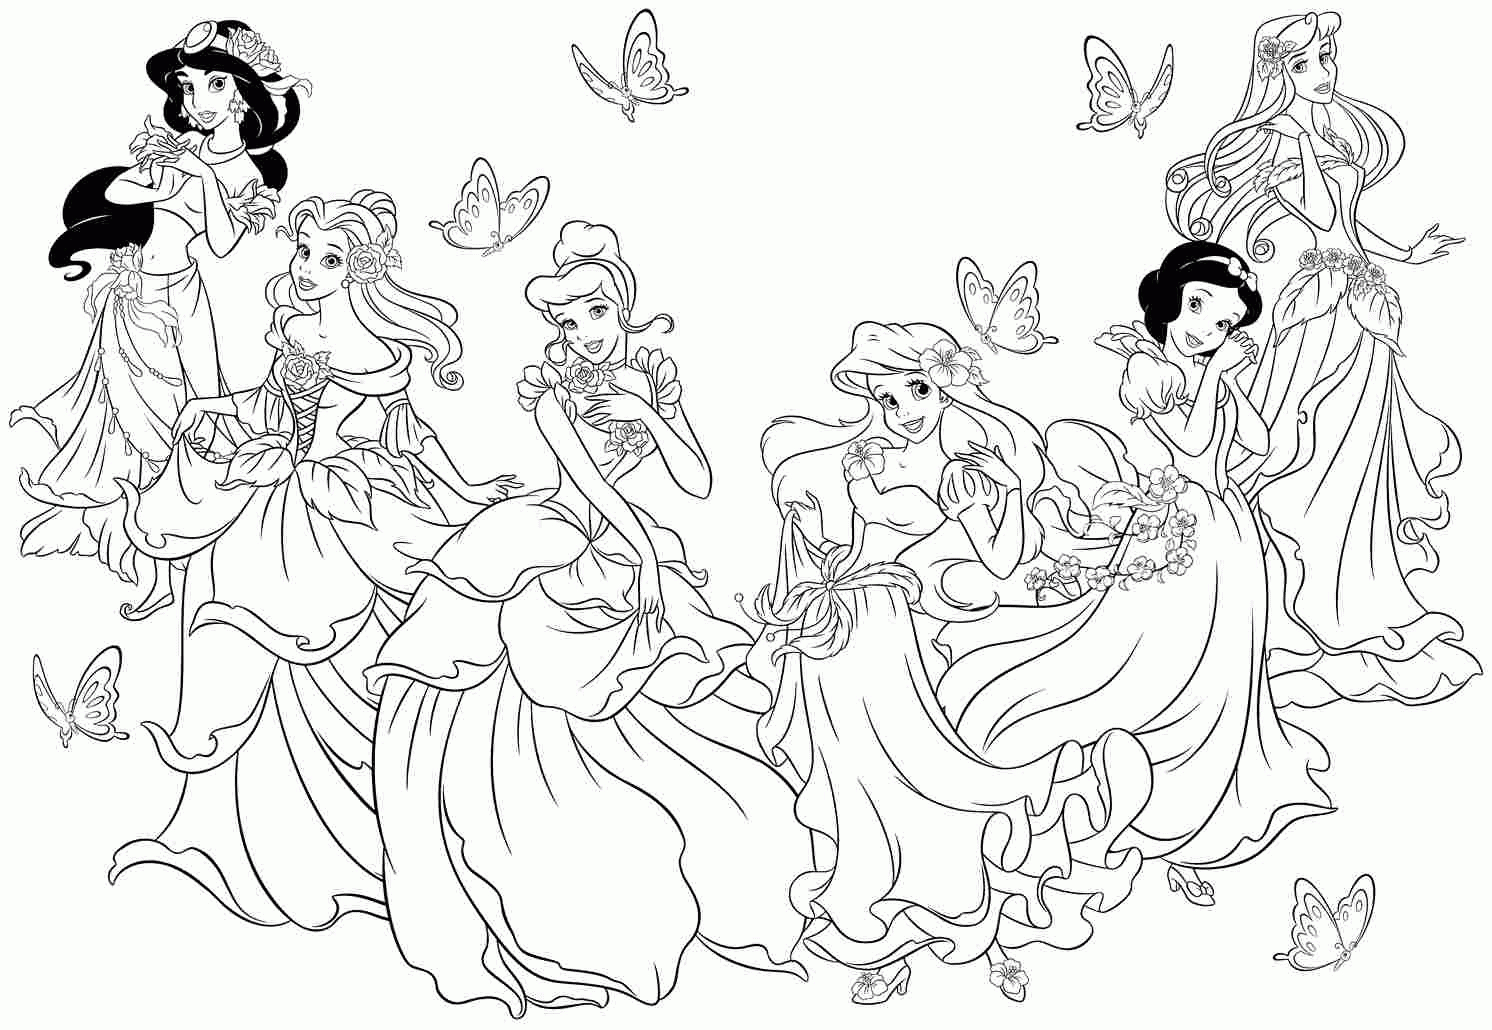 Disney Princess Coloring Pages Printable Coloring Pages Printable Princess Coloring Pages Free Super Why To